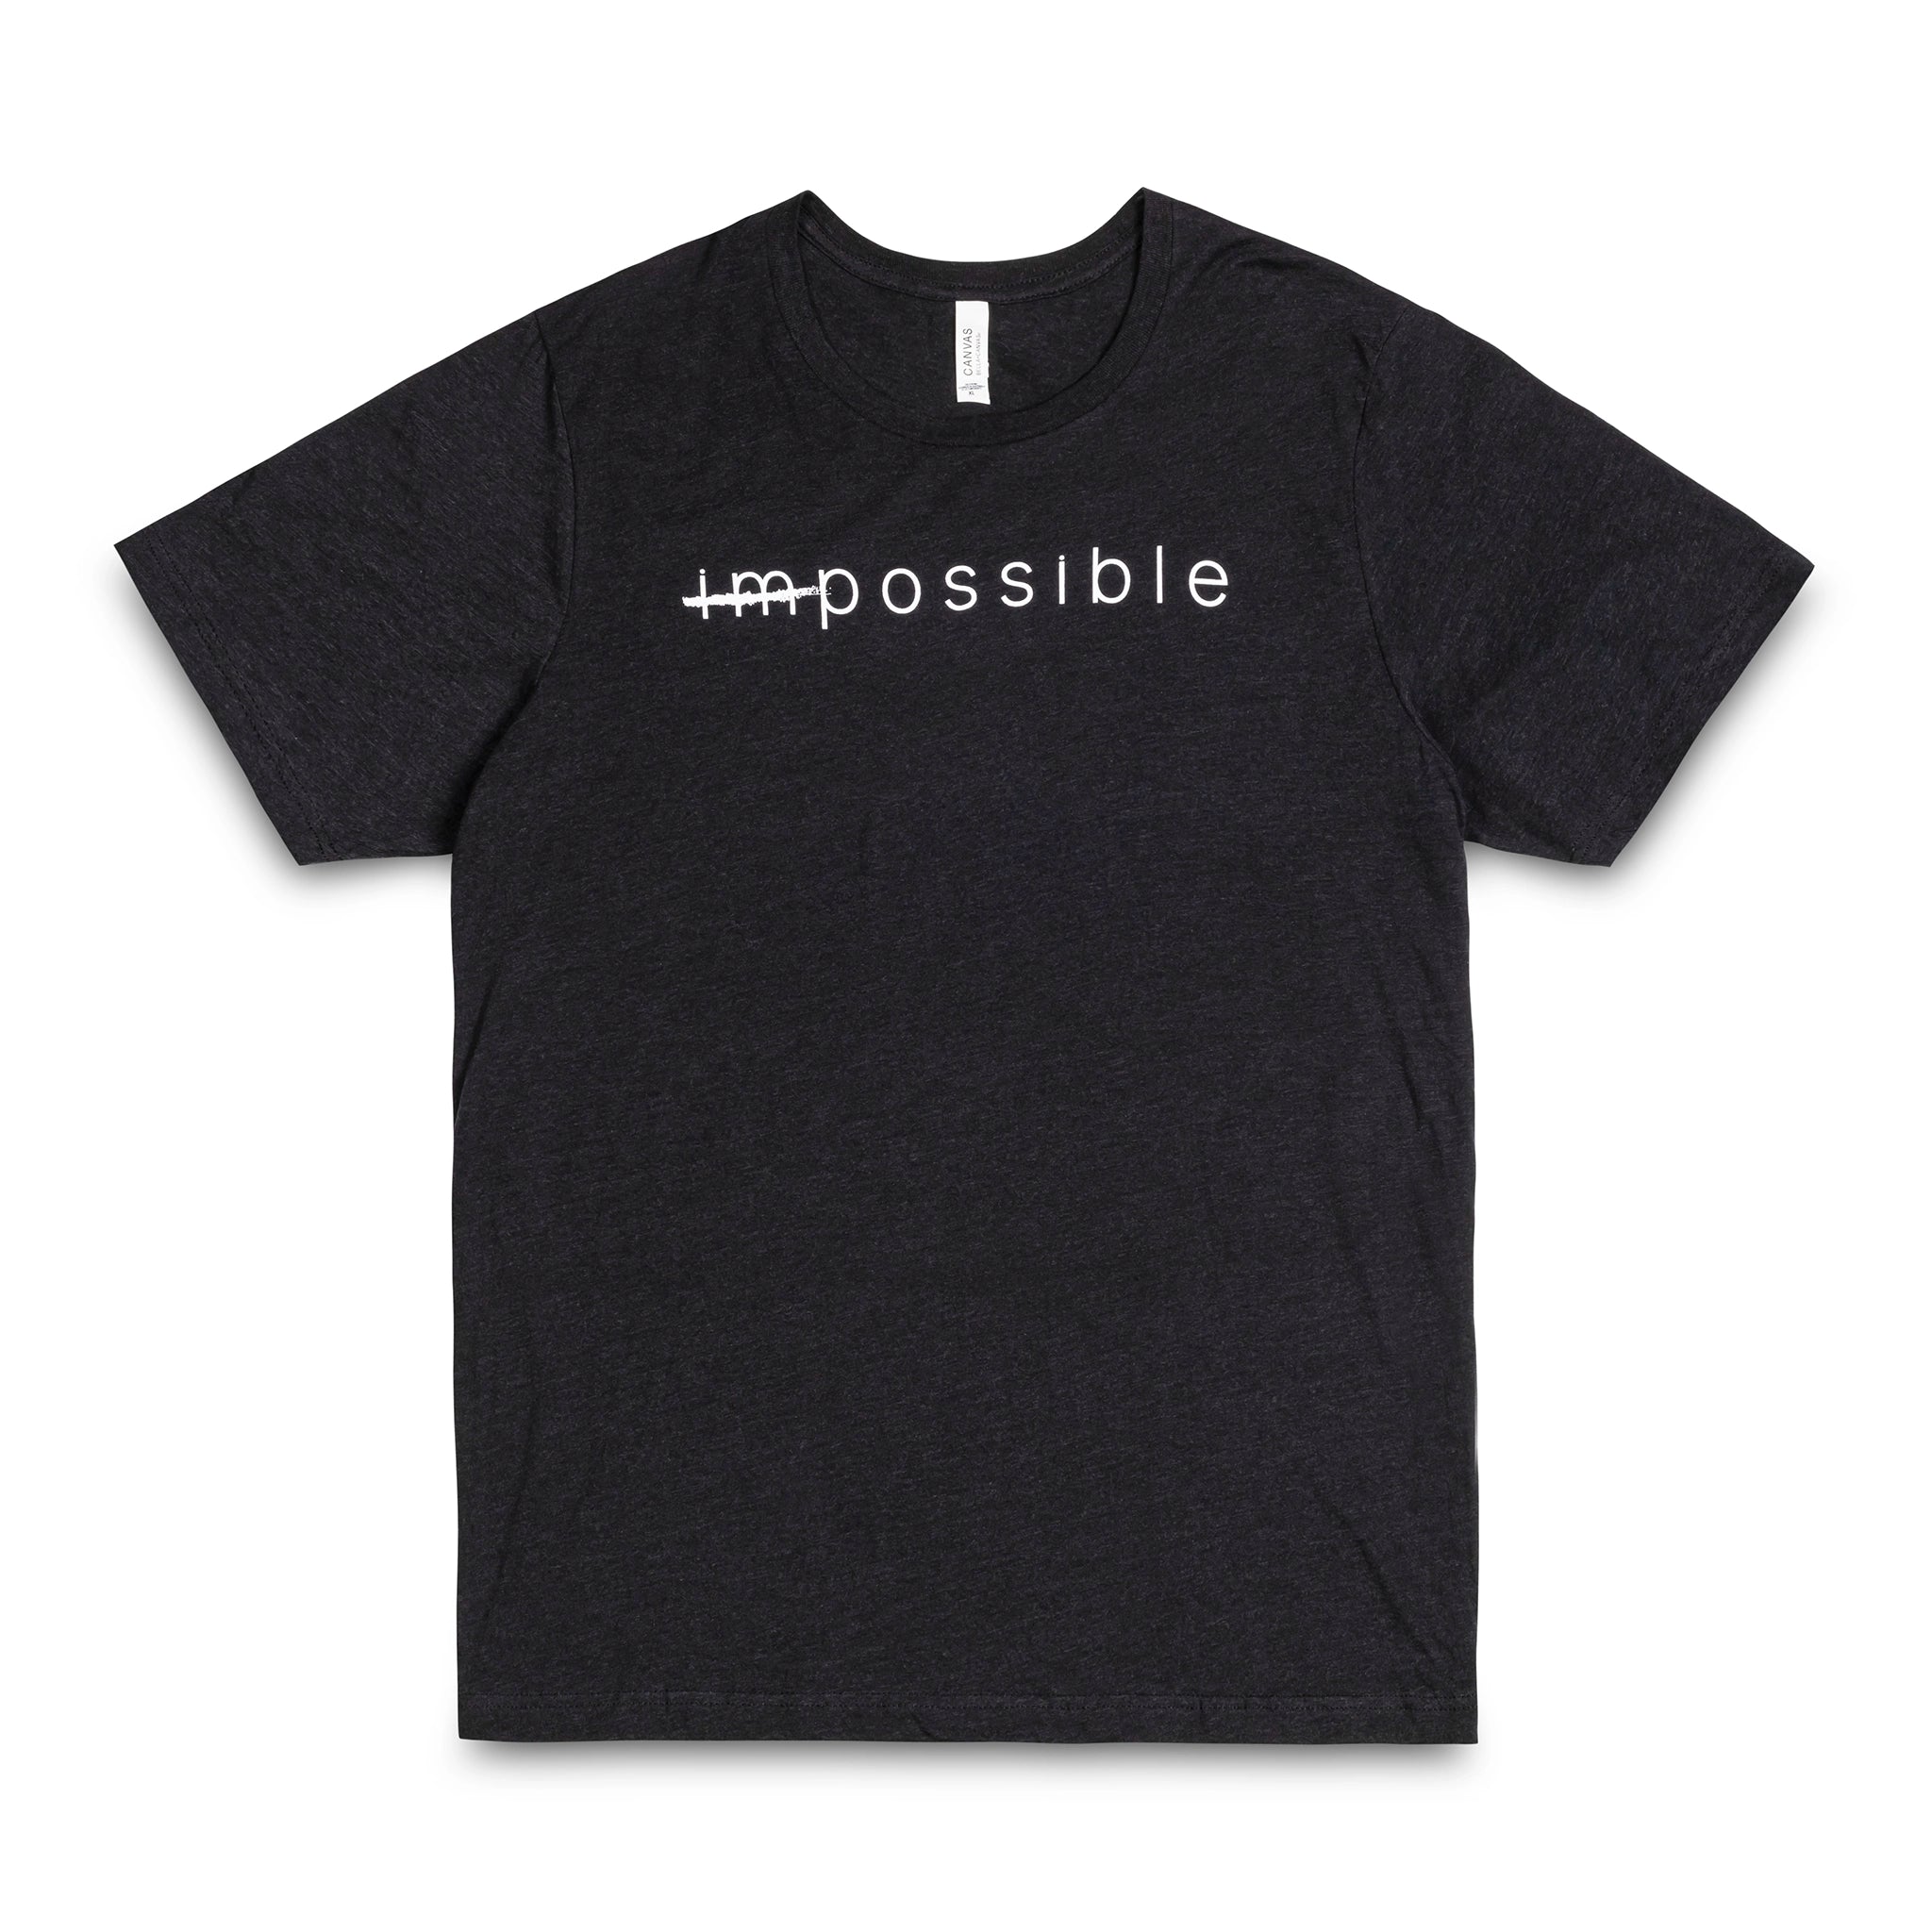 Impossible T Shirt